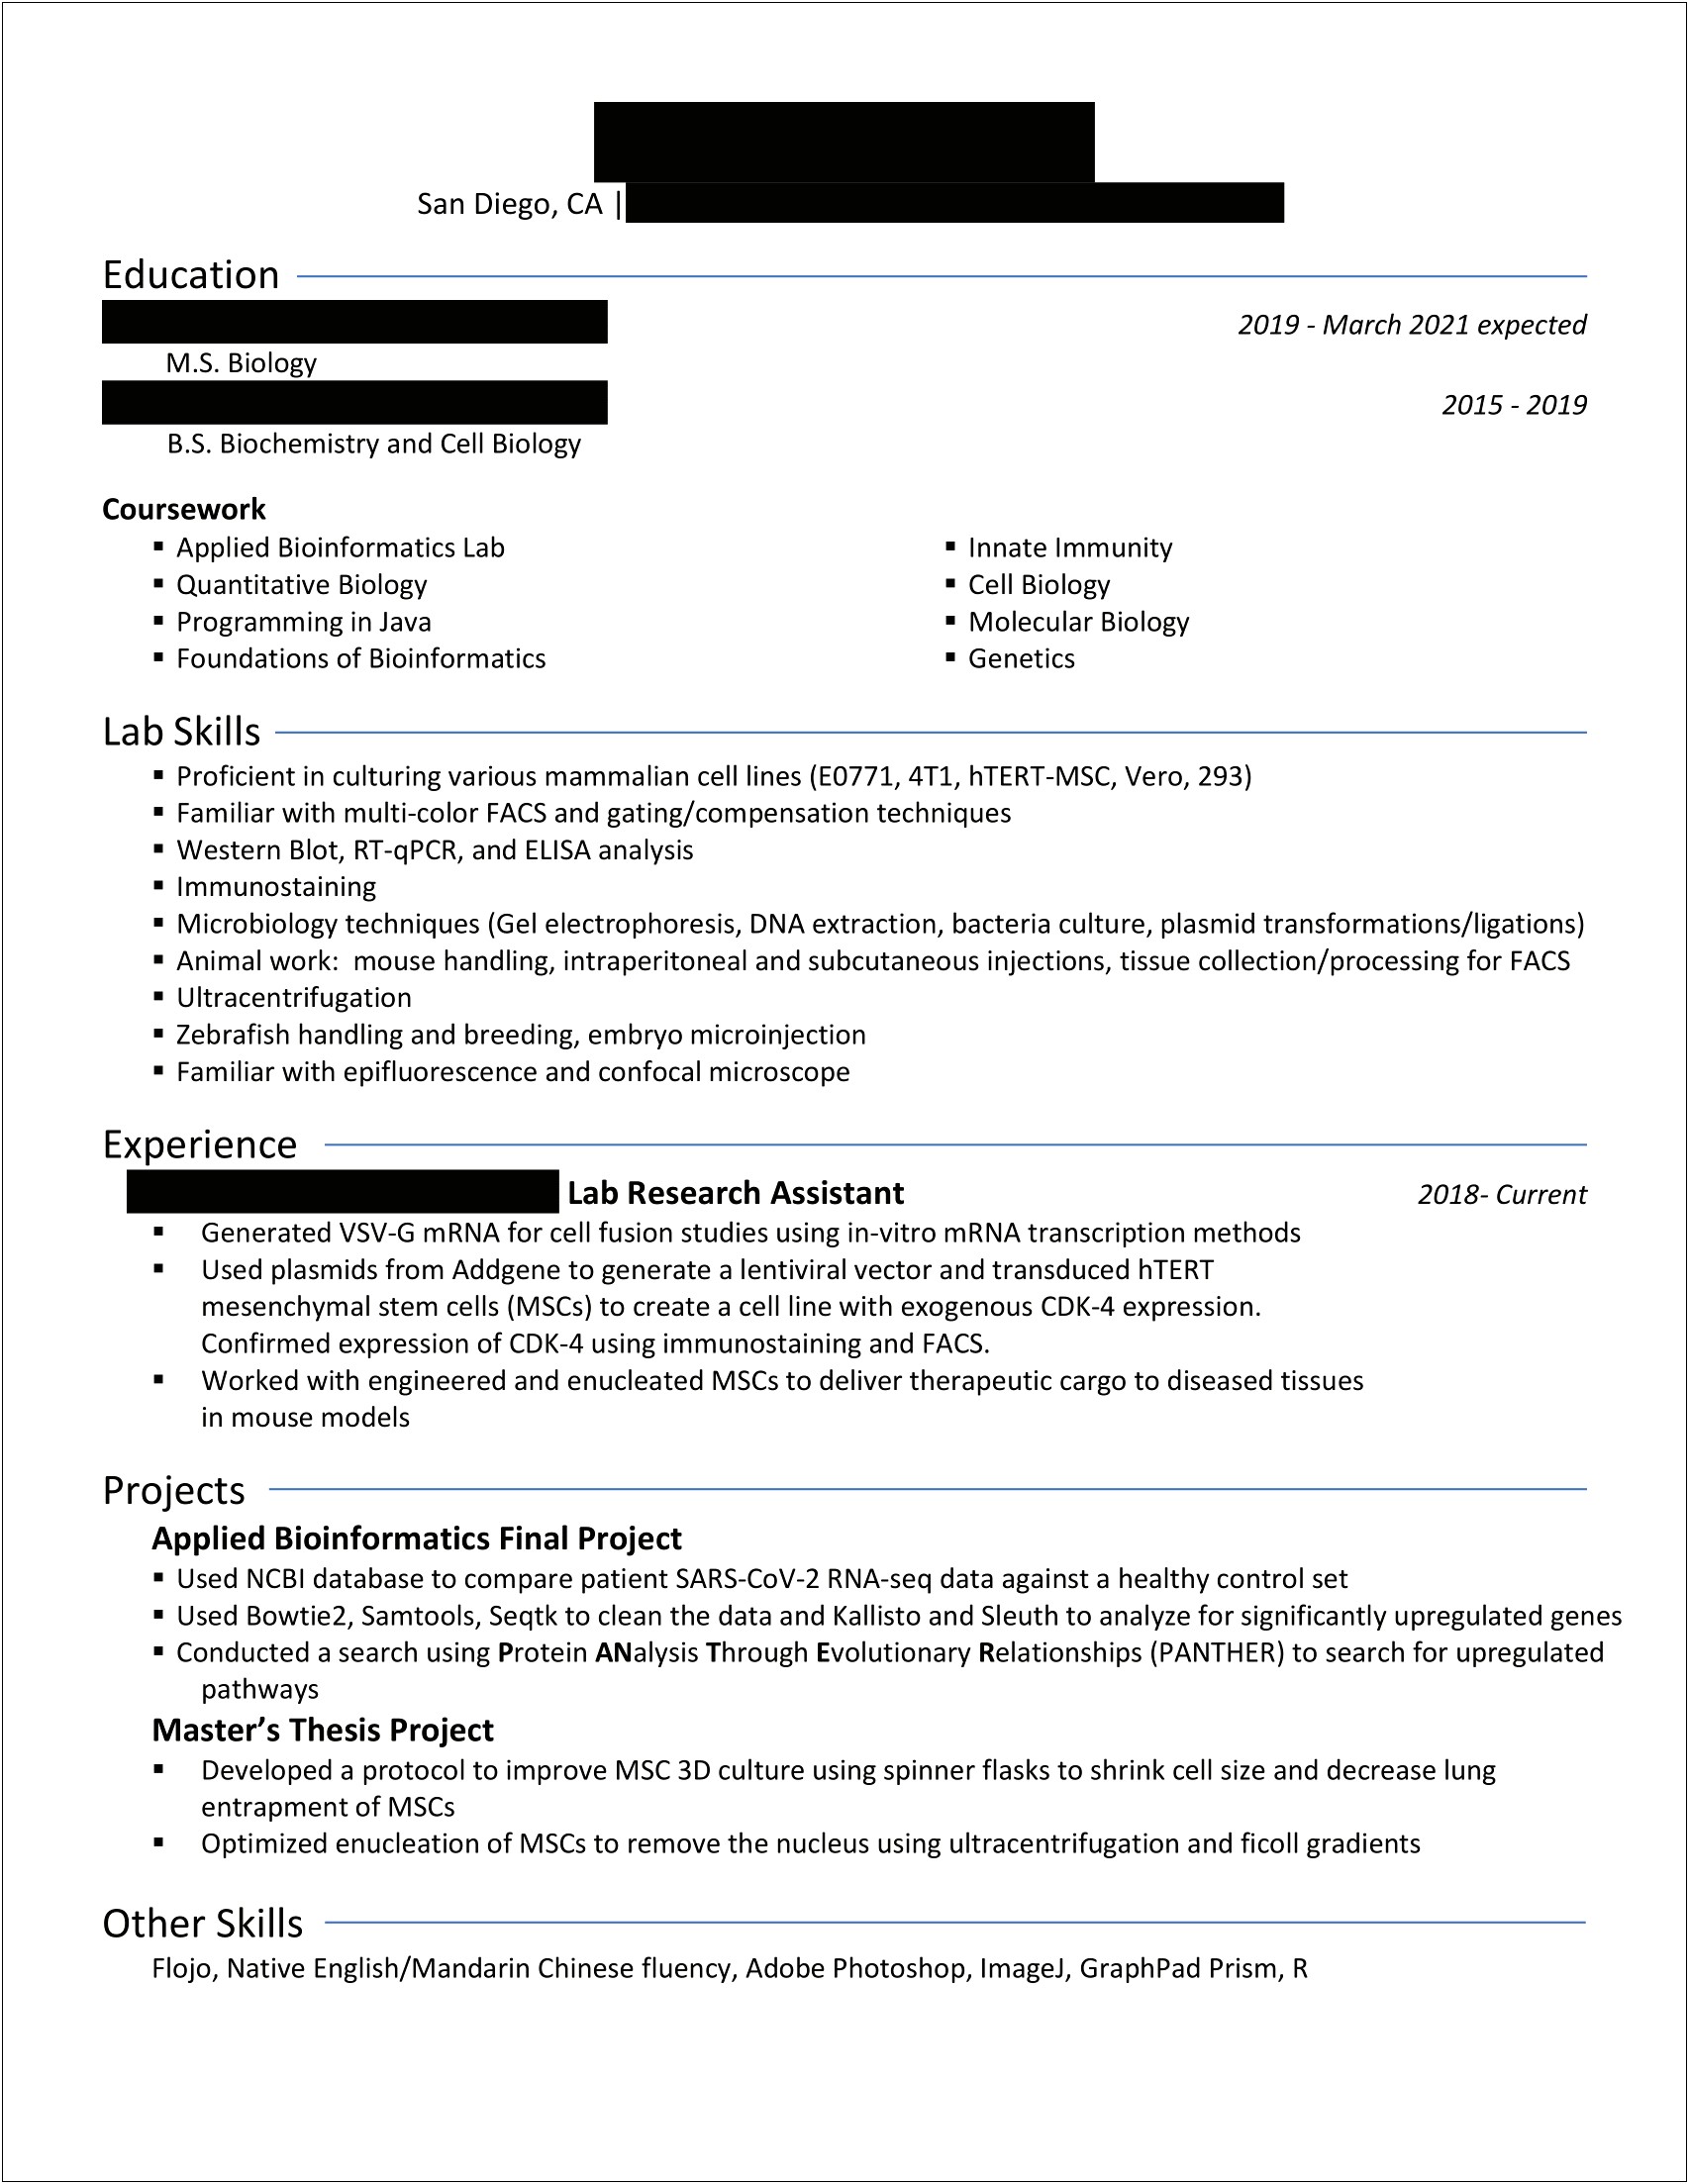 Example Of Resume For Biology Graduate